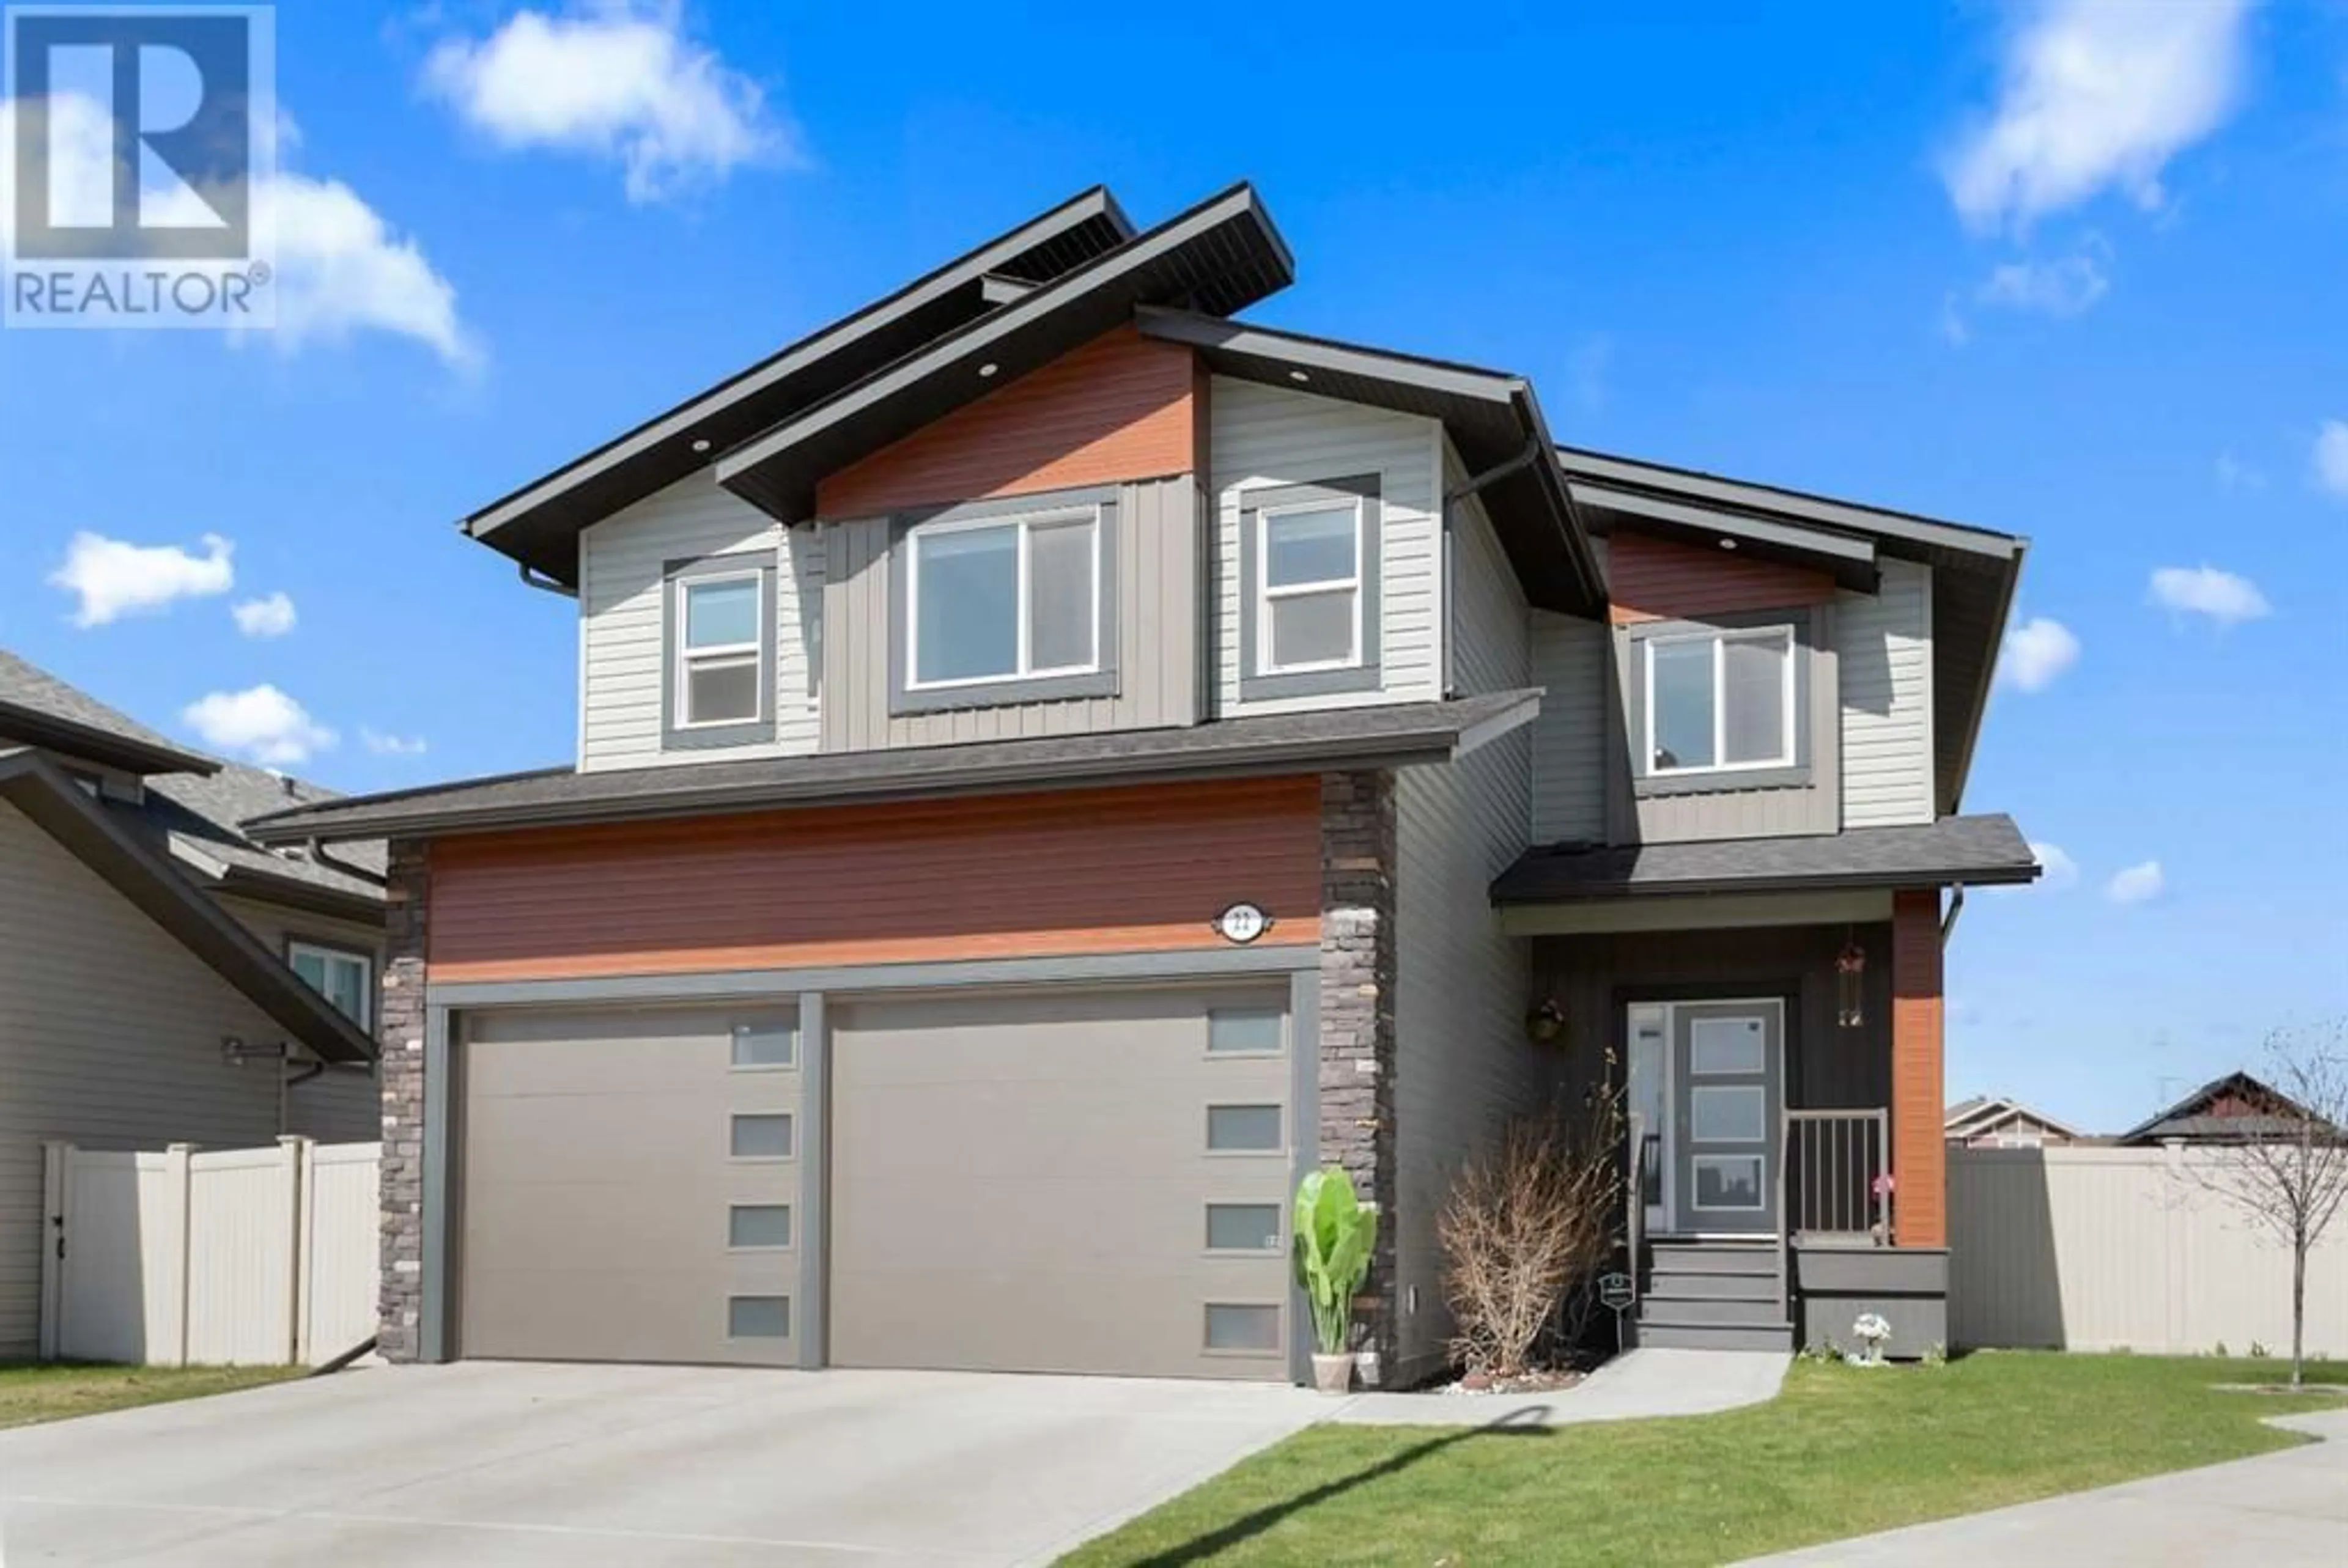 Home with brick exterior material for 22 Victory Close, Red Deer Alberta T4R0N4